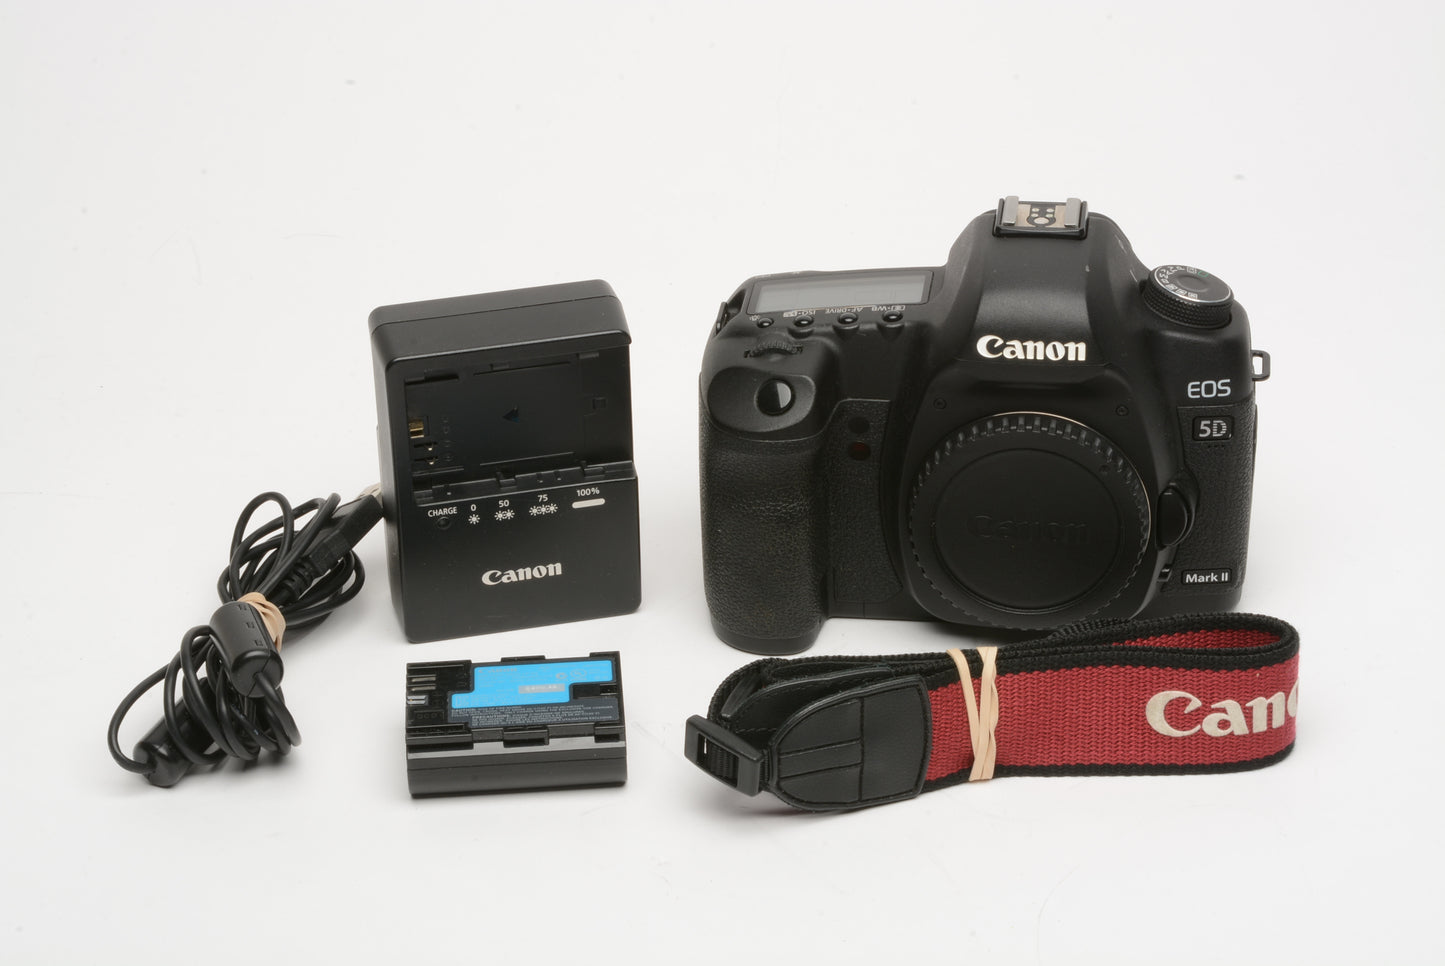 Canon EOS 5D Mark II DSLR Body, battery, charger, strap, Very clean! Only 17K Acts